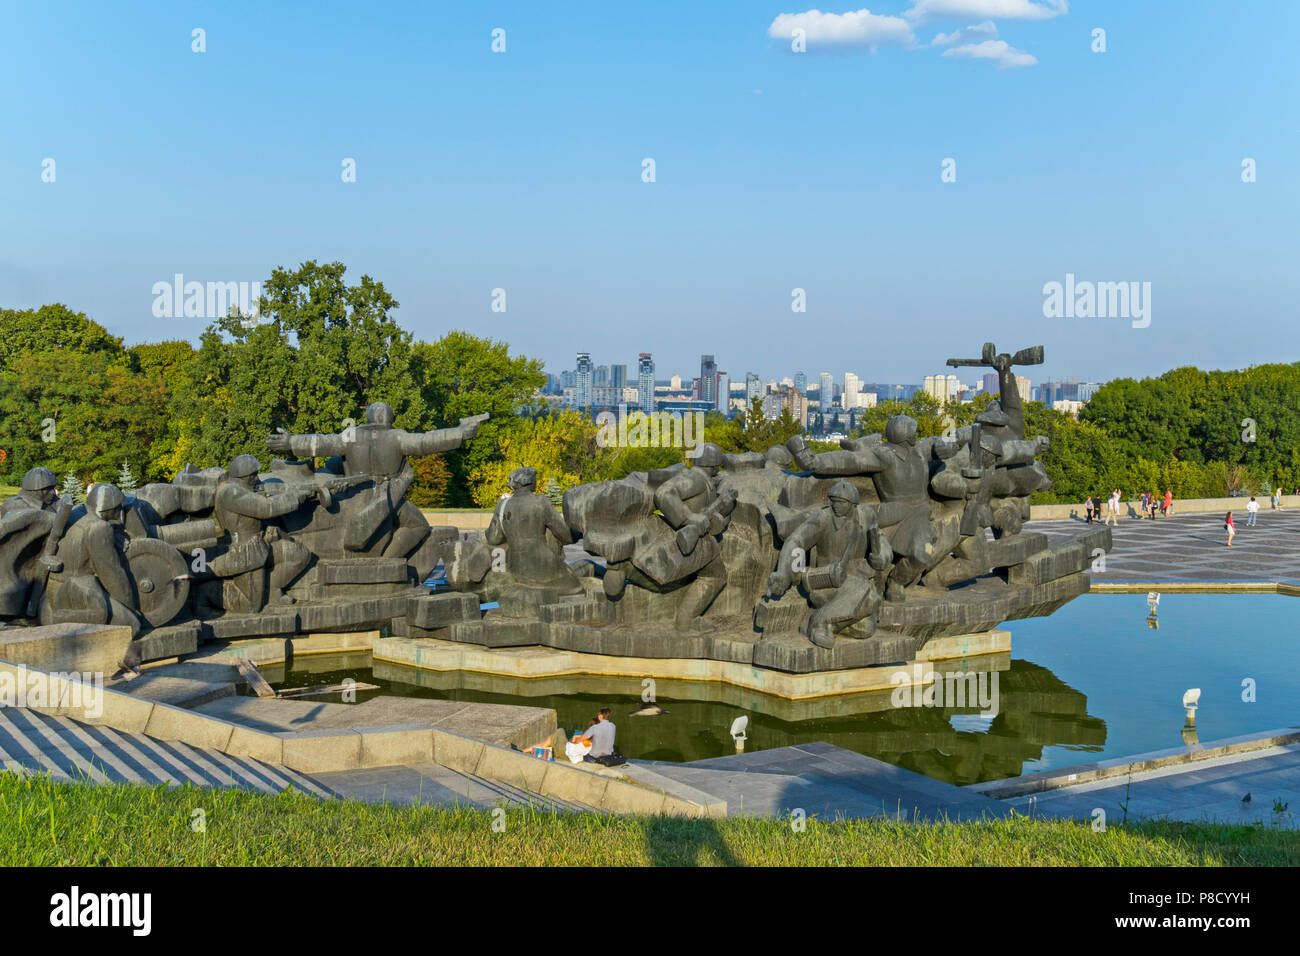 Memorial in the form of advancing soldiers made of stone. Standing in the park on the water against the backdrop of green trees and city quarters in t Stock Photo